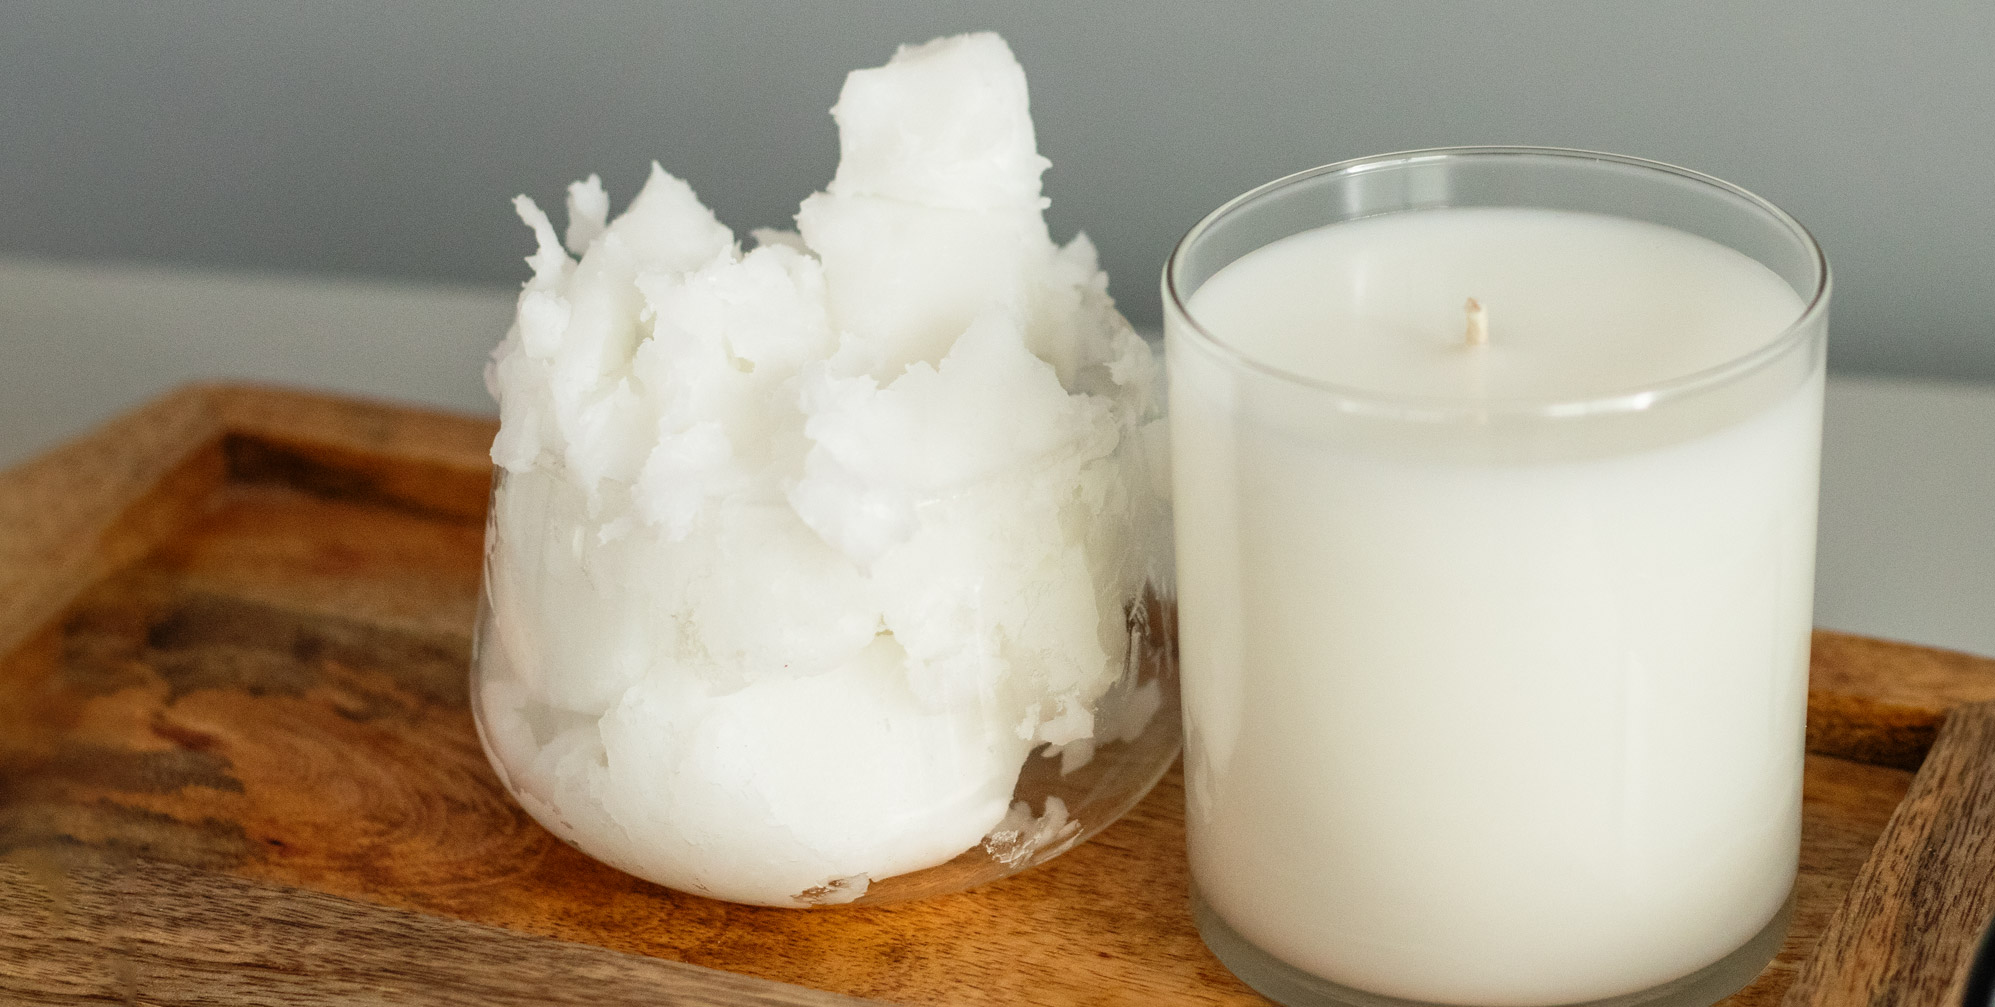  IGI 6046 coconut wax blend raw wax in cup next to a finished candle made from IGI 6046.